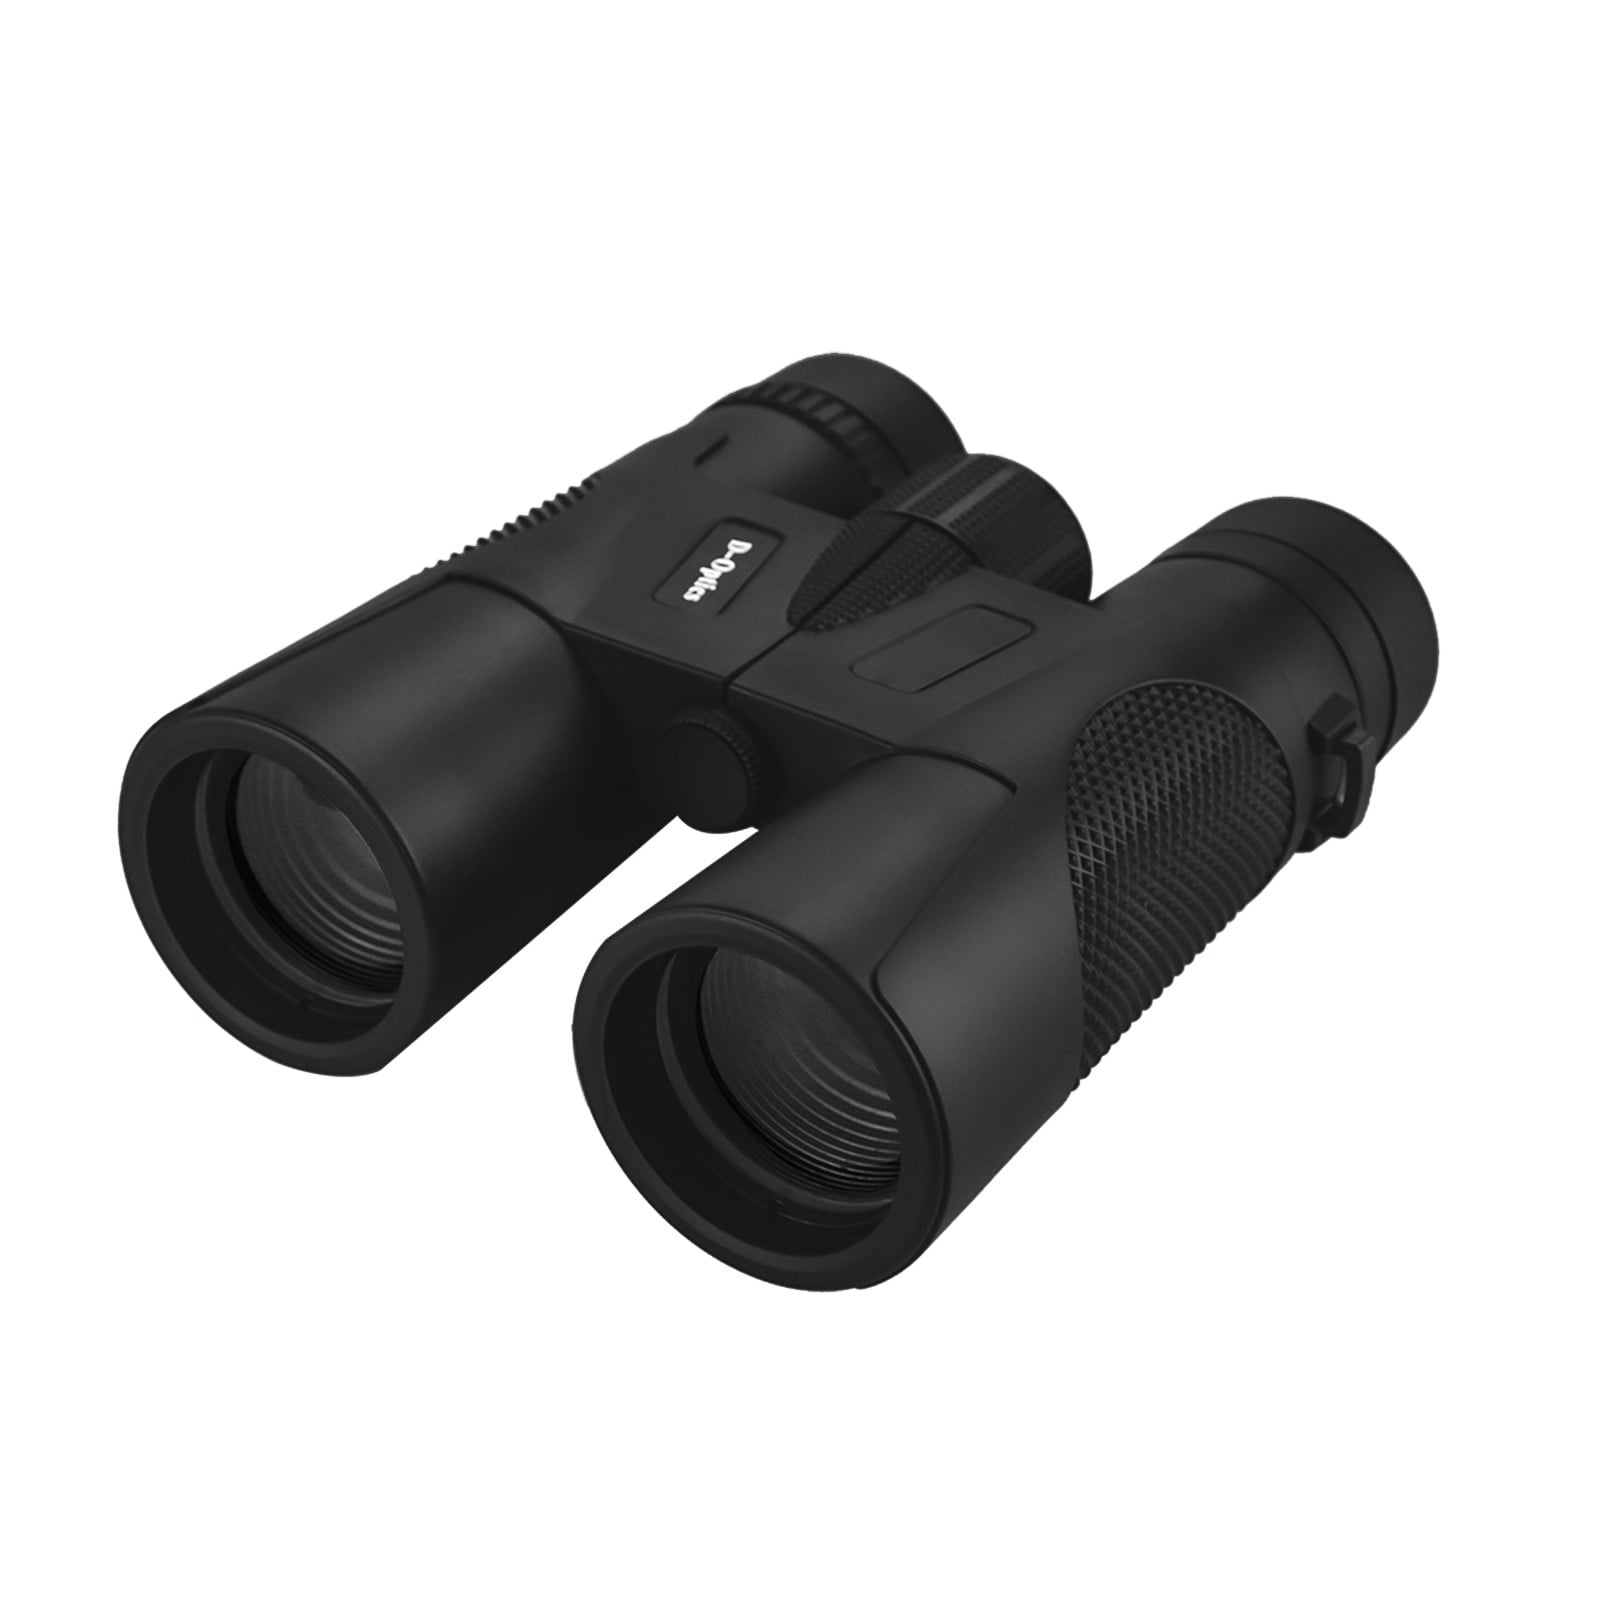 KBKYBUYZ Binoculars Telescopes For Adults,12×42 BAK4 Prism 12X Zoom High-power High-definition Low-light Night Vision Outdoor Adult Viewing Glasses